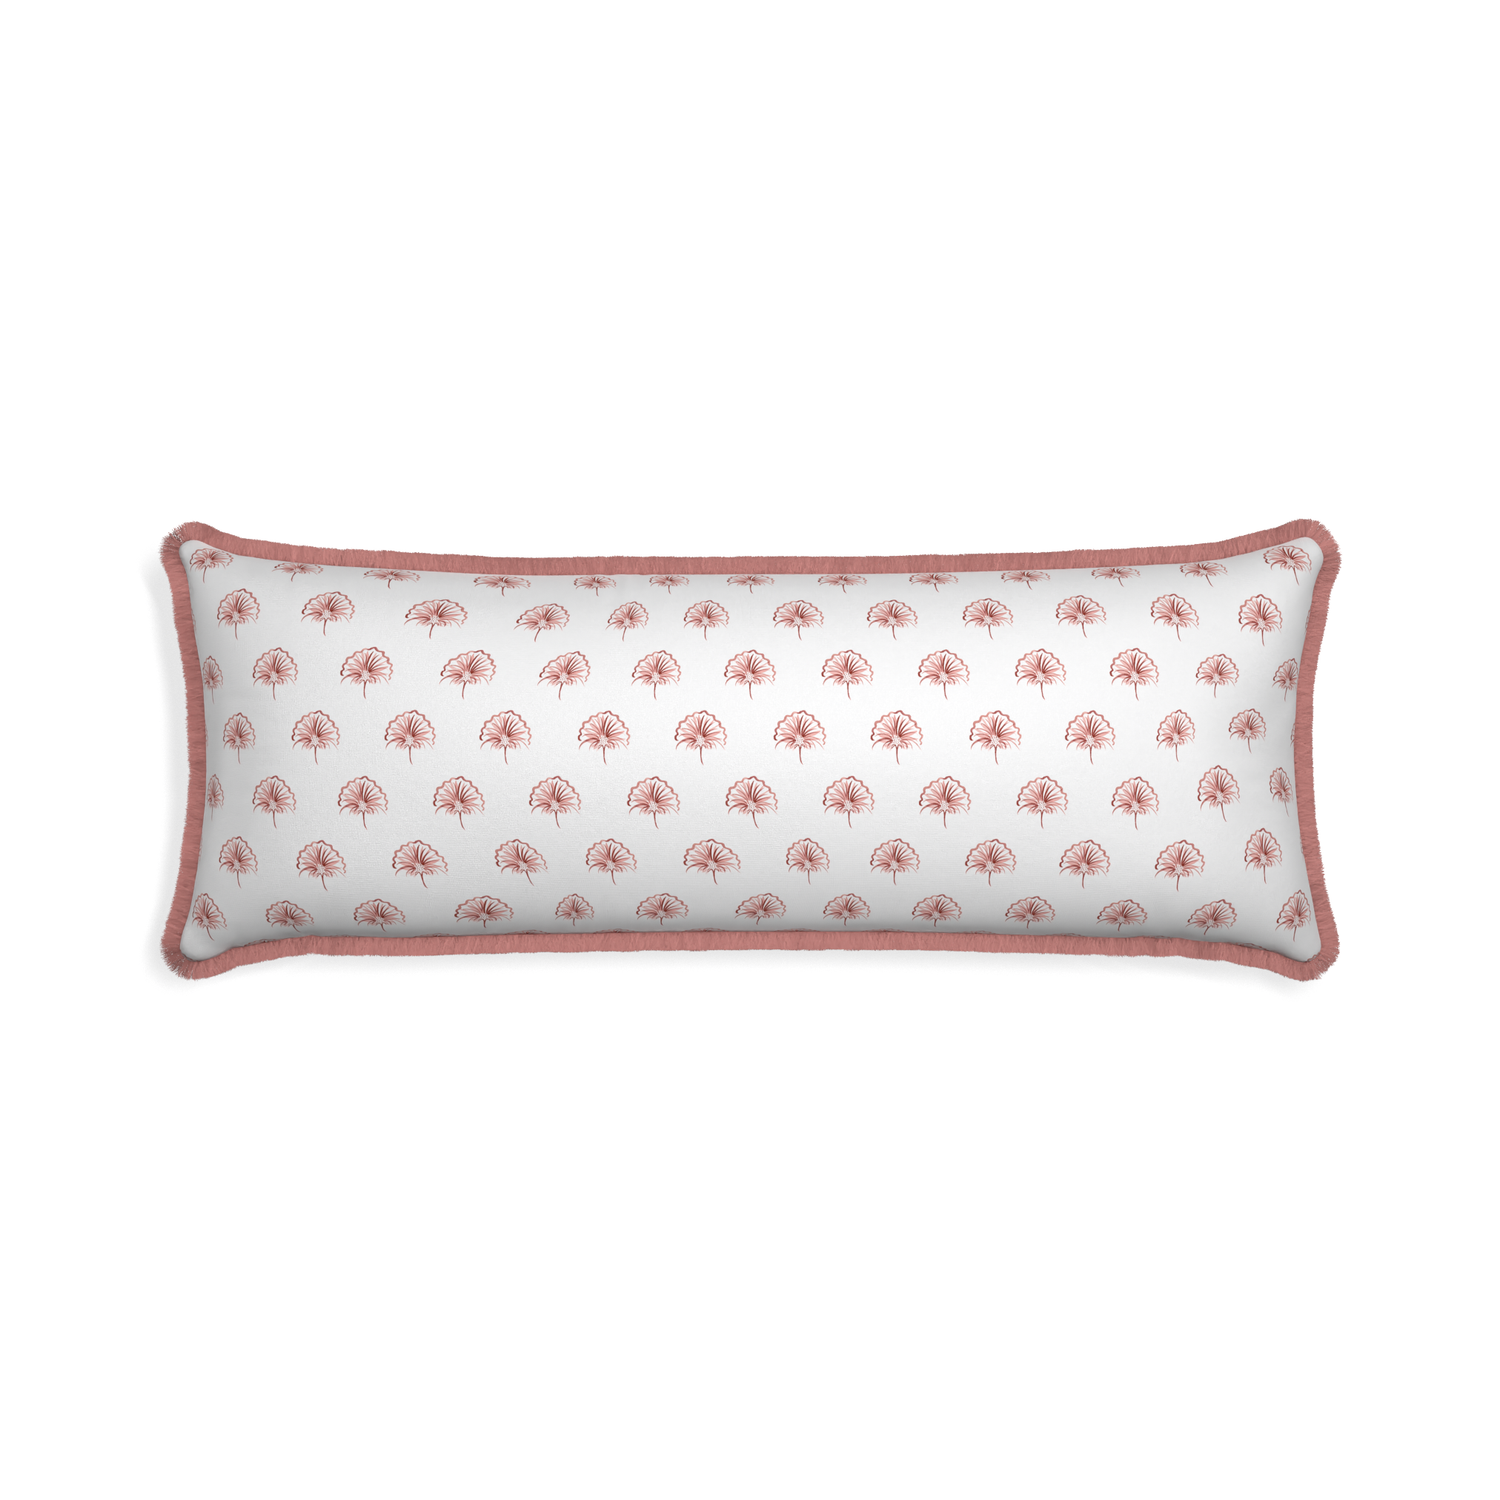 Xl-lumbar penelope rose custom floral pinkpillow with d fringe on white background